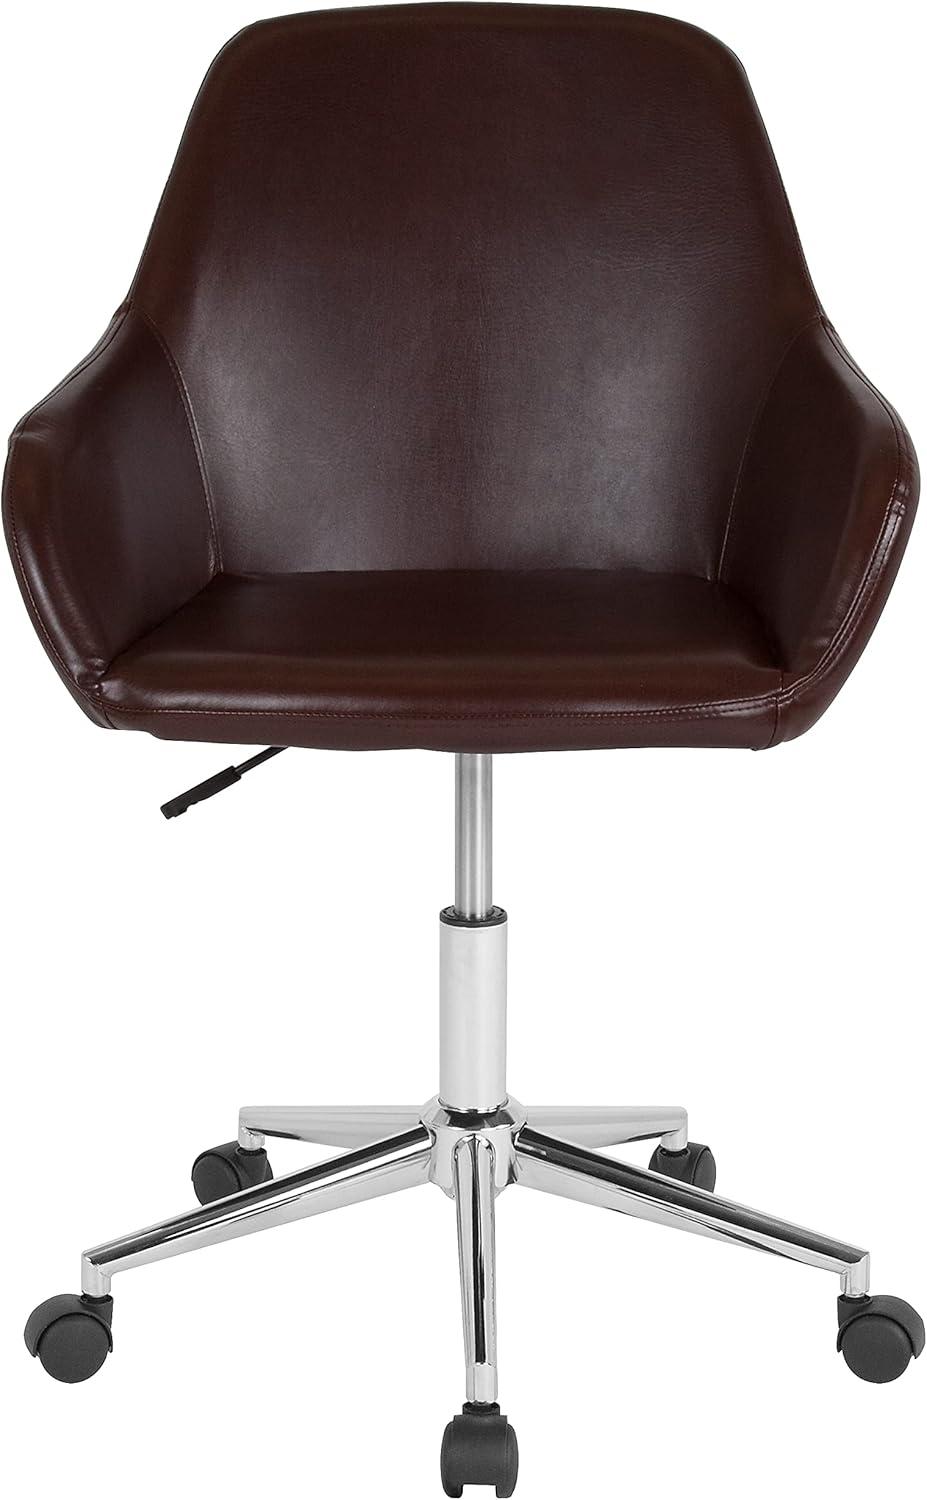 Cortana Mid-Back Brown LeatherSoft Swivel Task Chair with Chrome Base